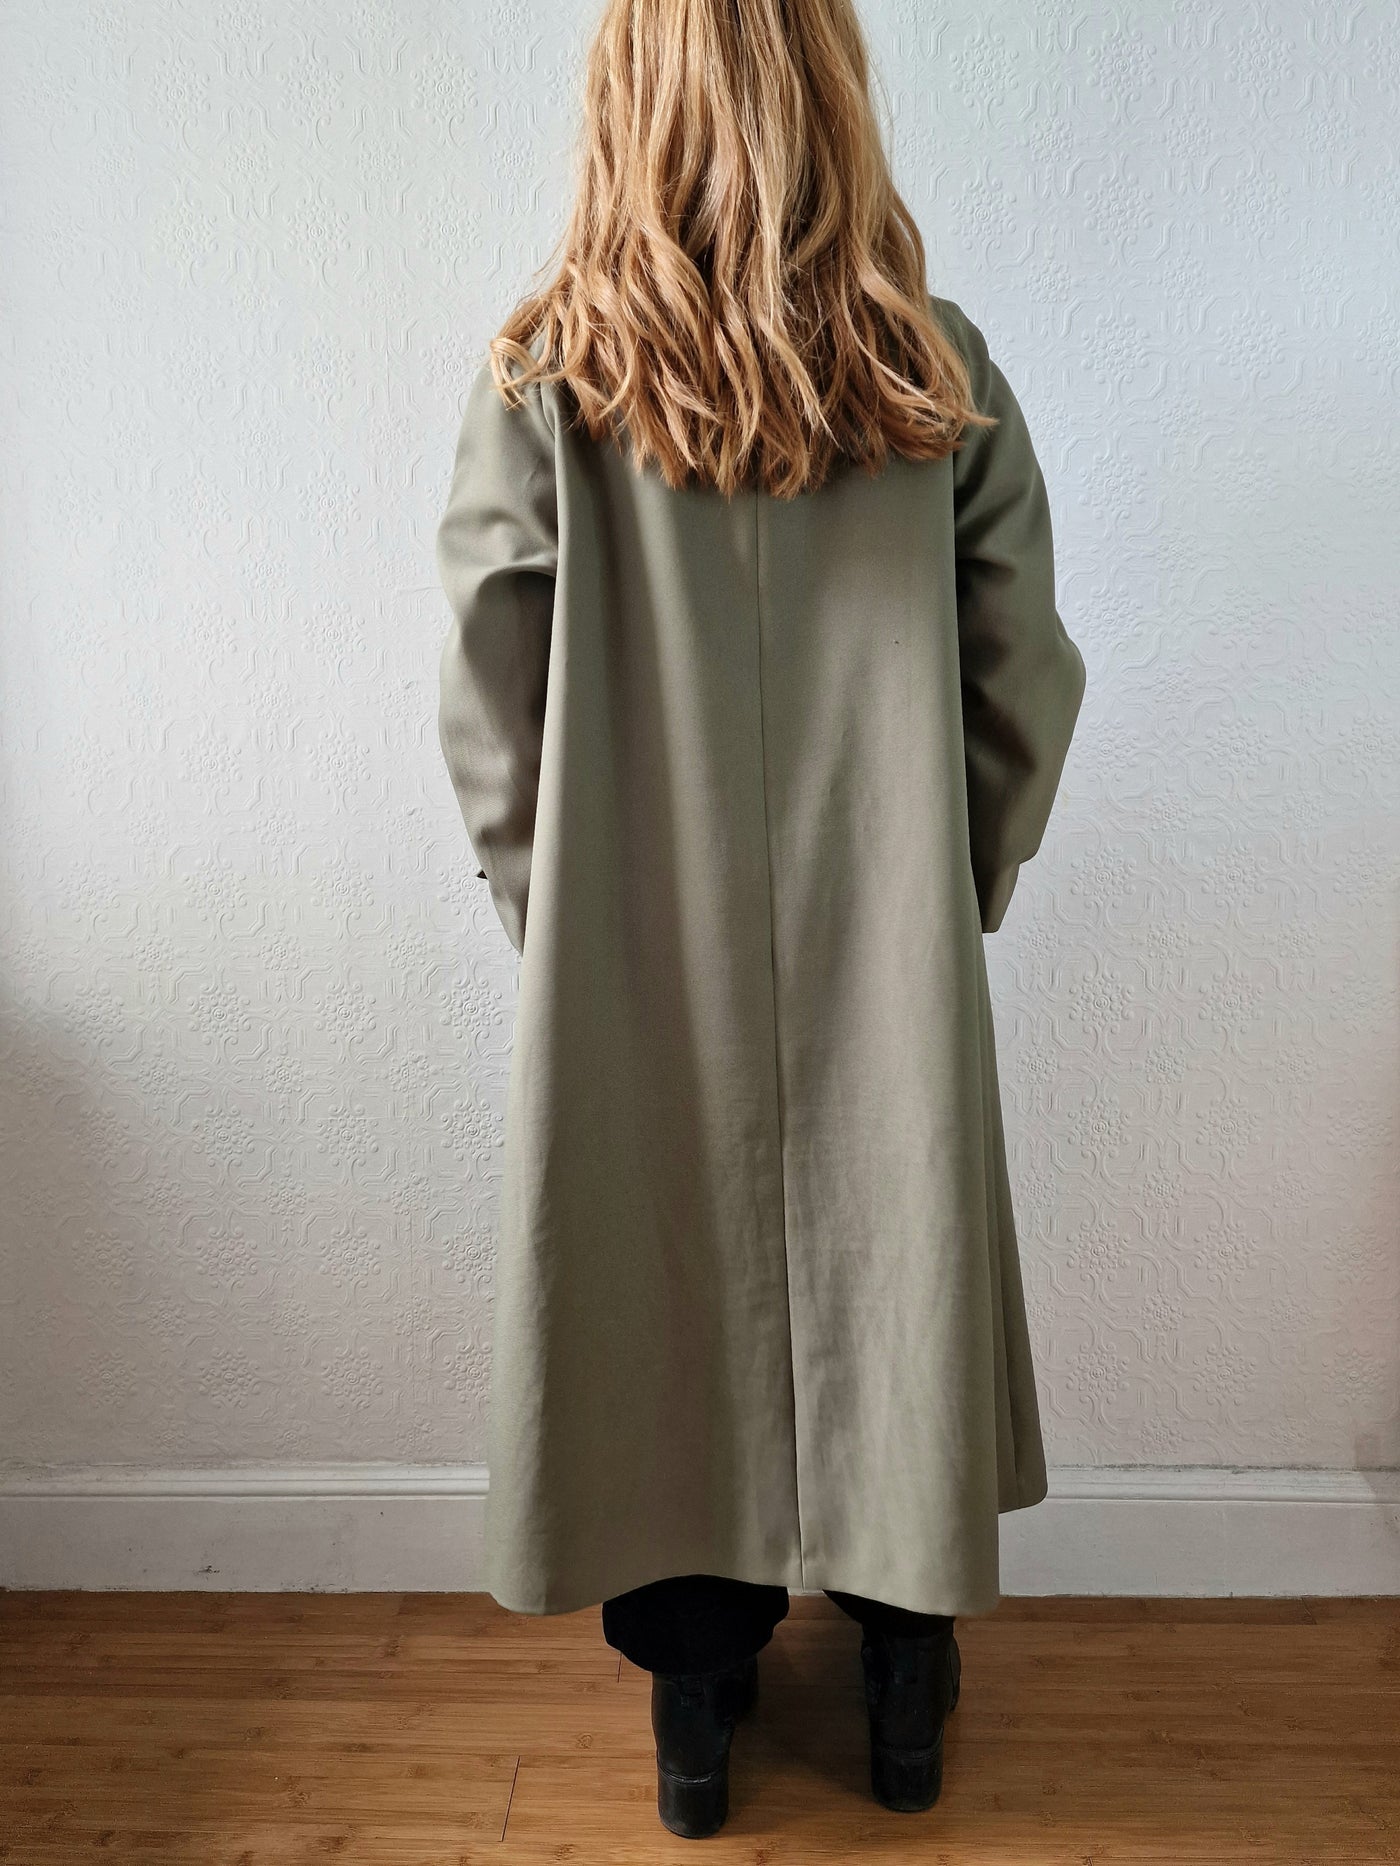 Vintage Khaki Green Single Breasted Trench Coat - M